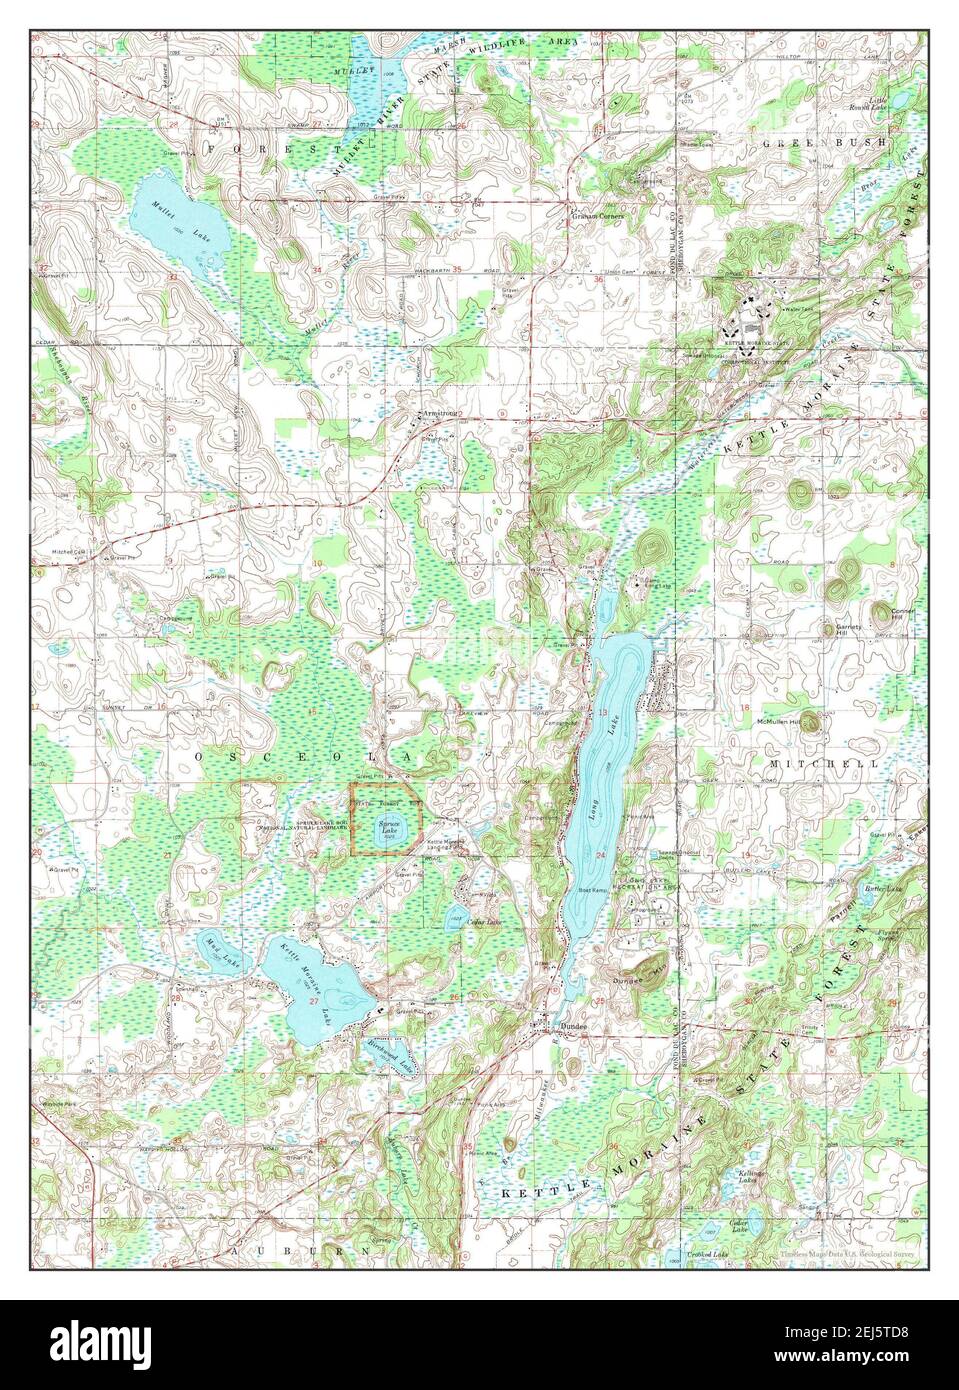 Dundee, Wisconsin, map 1974, 1:24000, United States of America by Timeless Maps, data U.S. Geological Survey Stock Photo